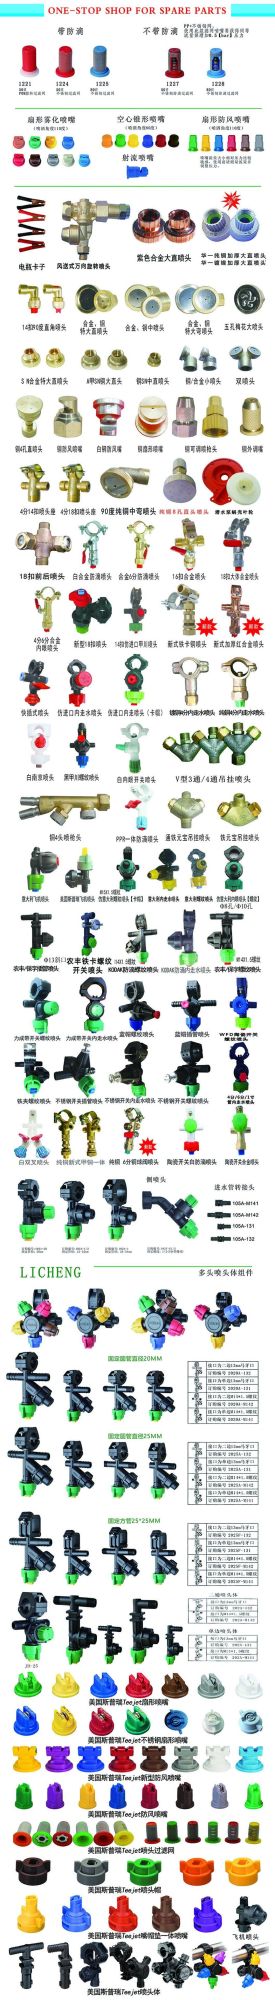 Pressure Stainless Steel Hand Sprayer Drones Pesticide Drone Thermal Fogging Machine Lechler Nozzle